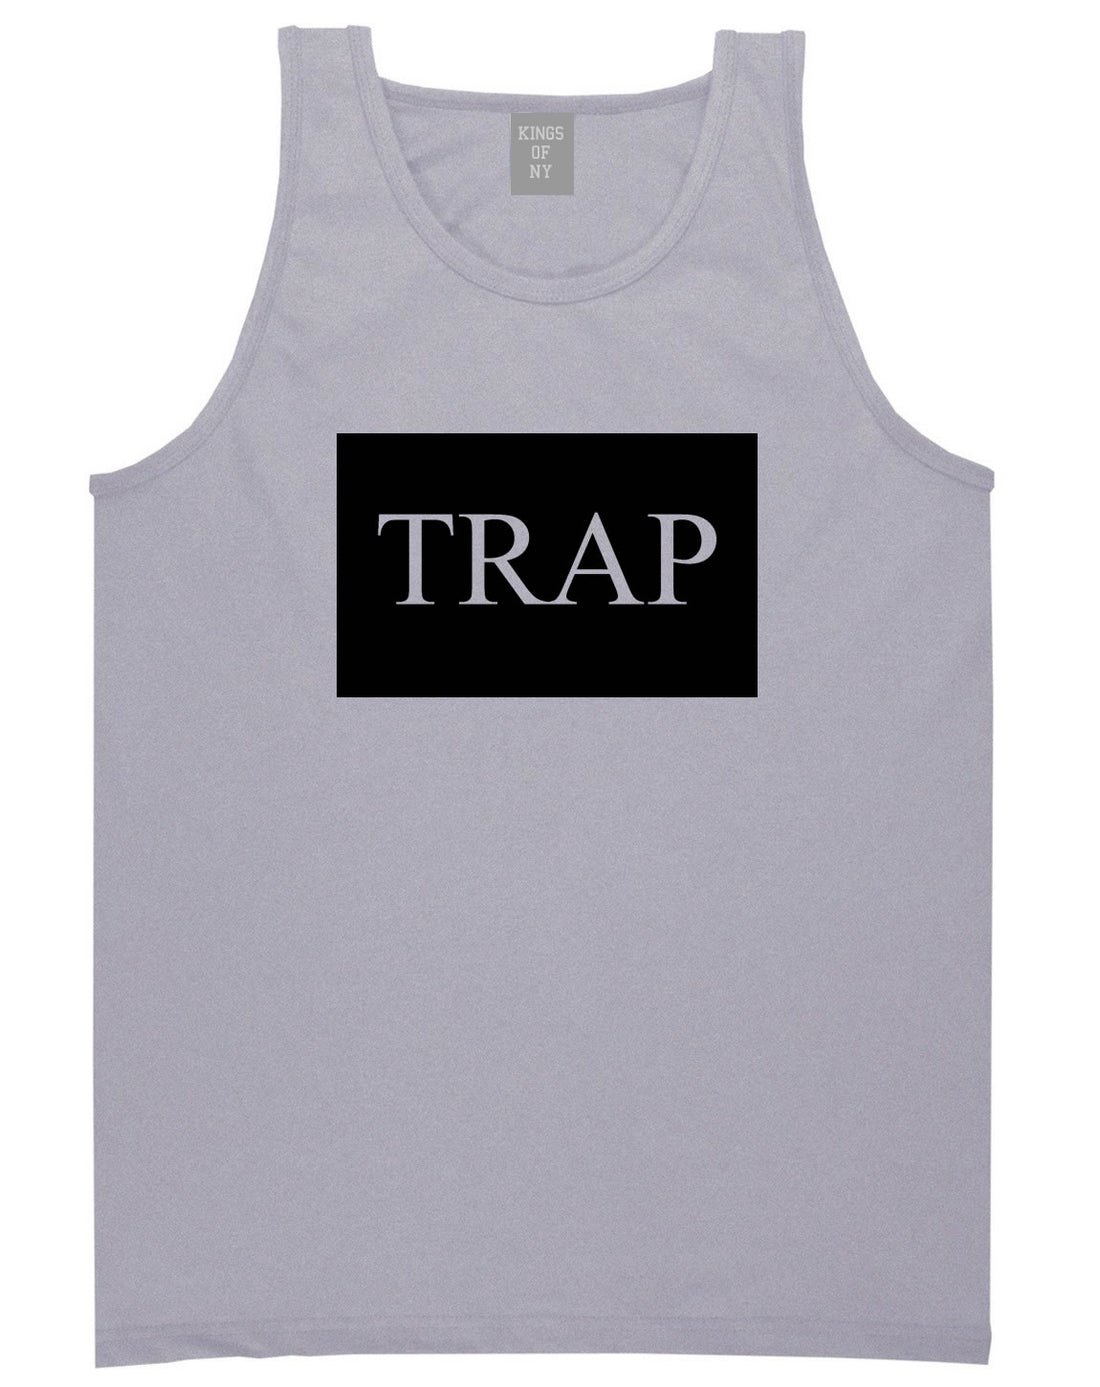 Trap Rectangle Logo Tank Top in Grey By Kings Of NY